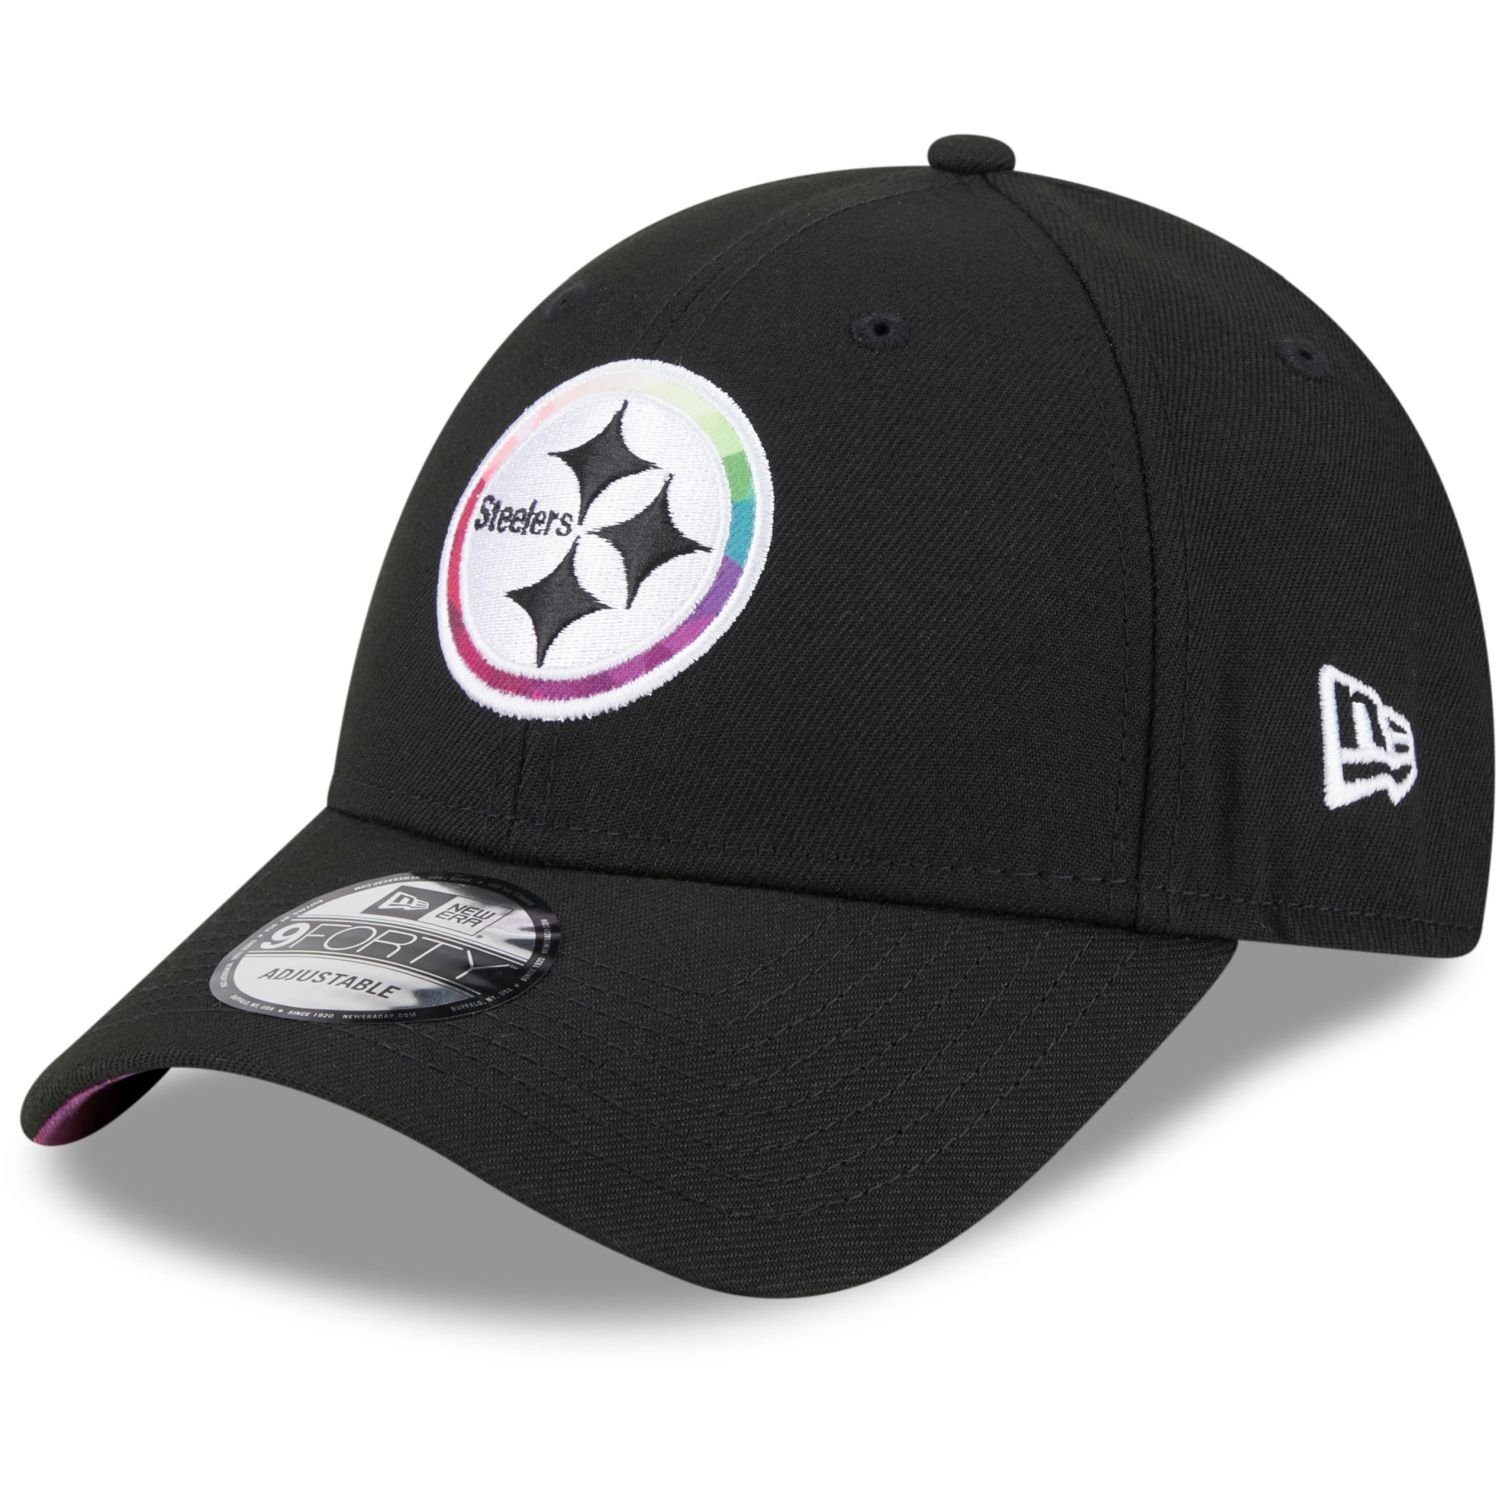 New Era Snapback Cap 9FORTY CRUCIAL CATCH NFL Teams Pittsburgh Steelers